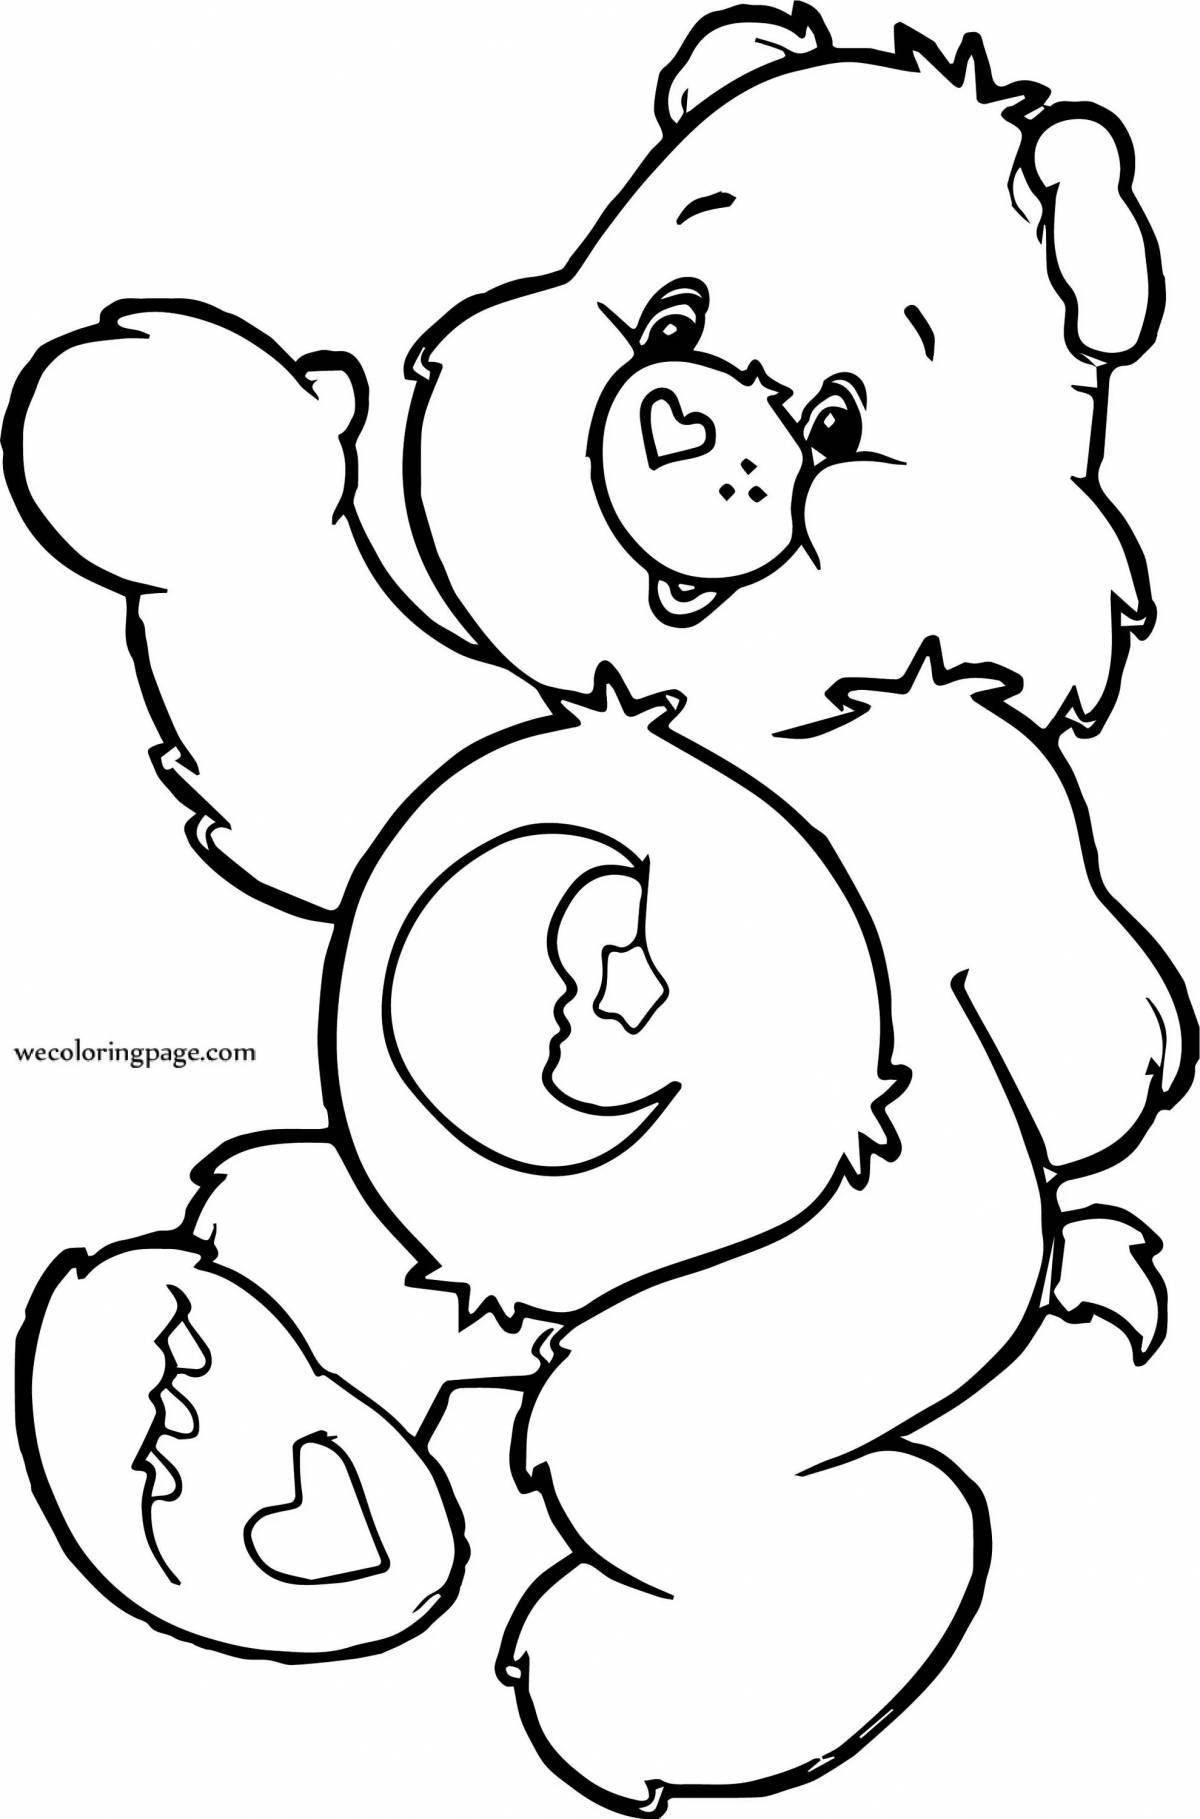 Animated bear and rabbit coloring pages